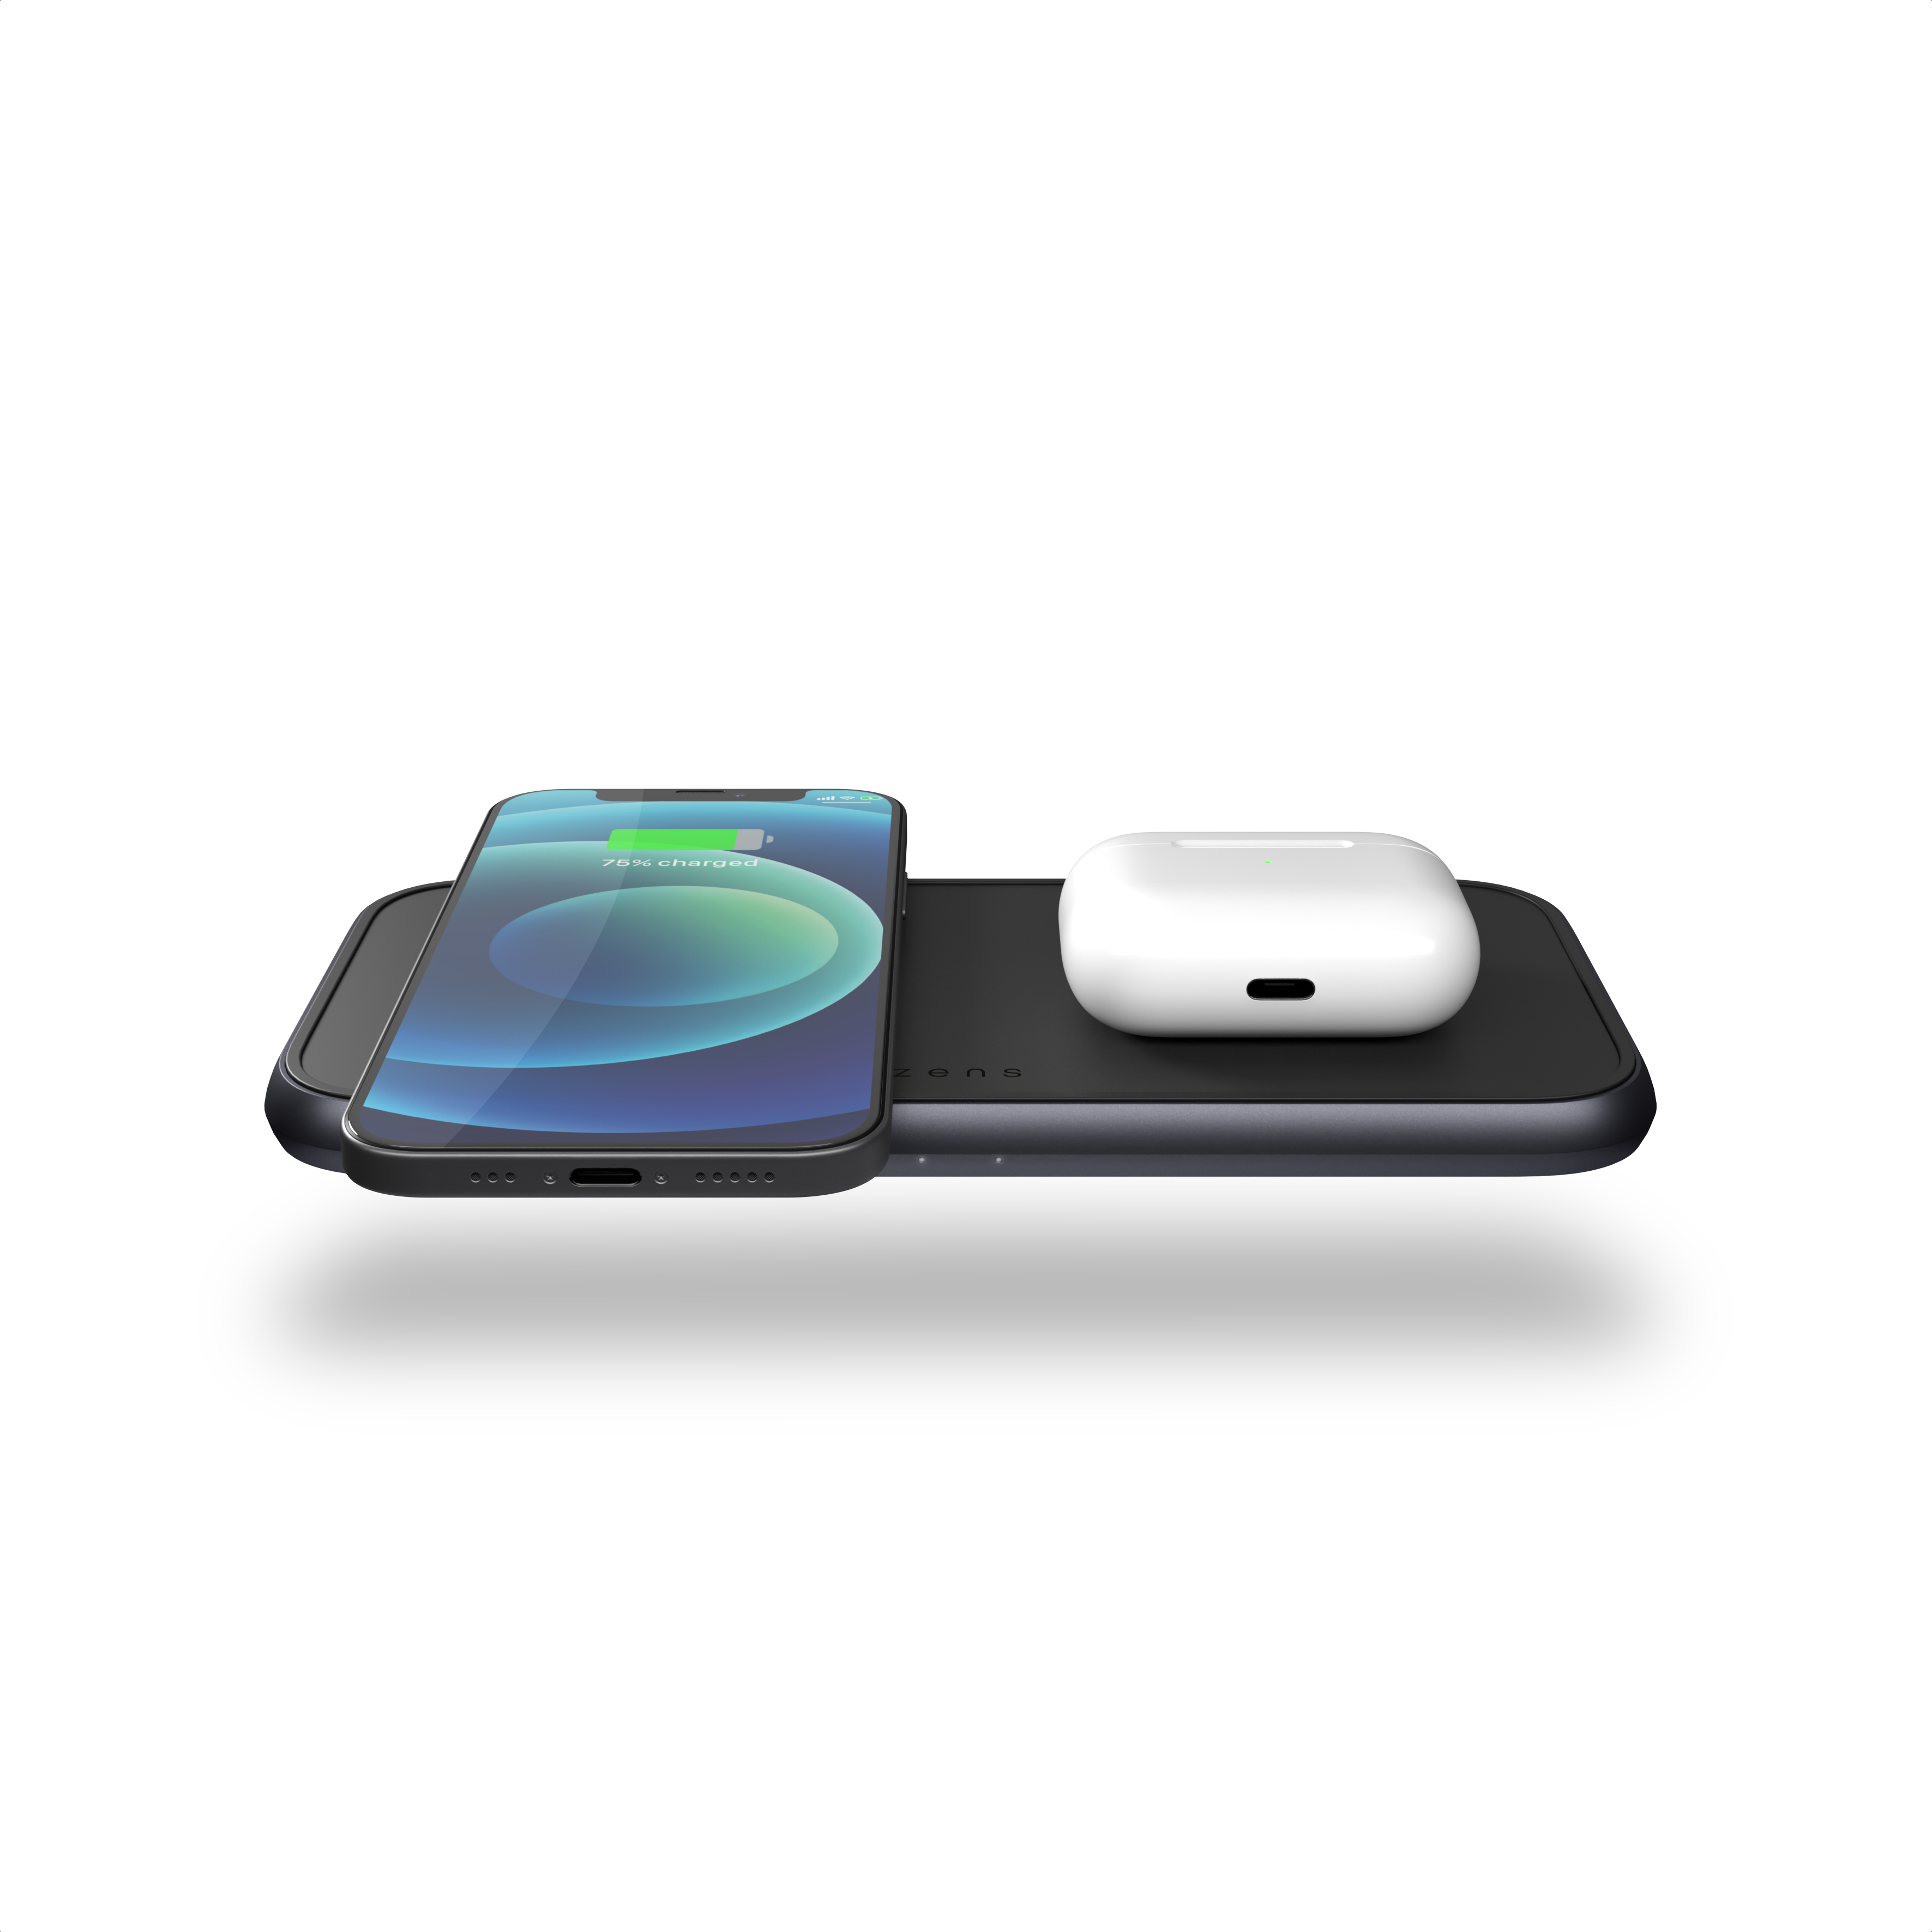 ZEDC10B - Zens Dual Aluminium Wireless Charger Front Top View with devices